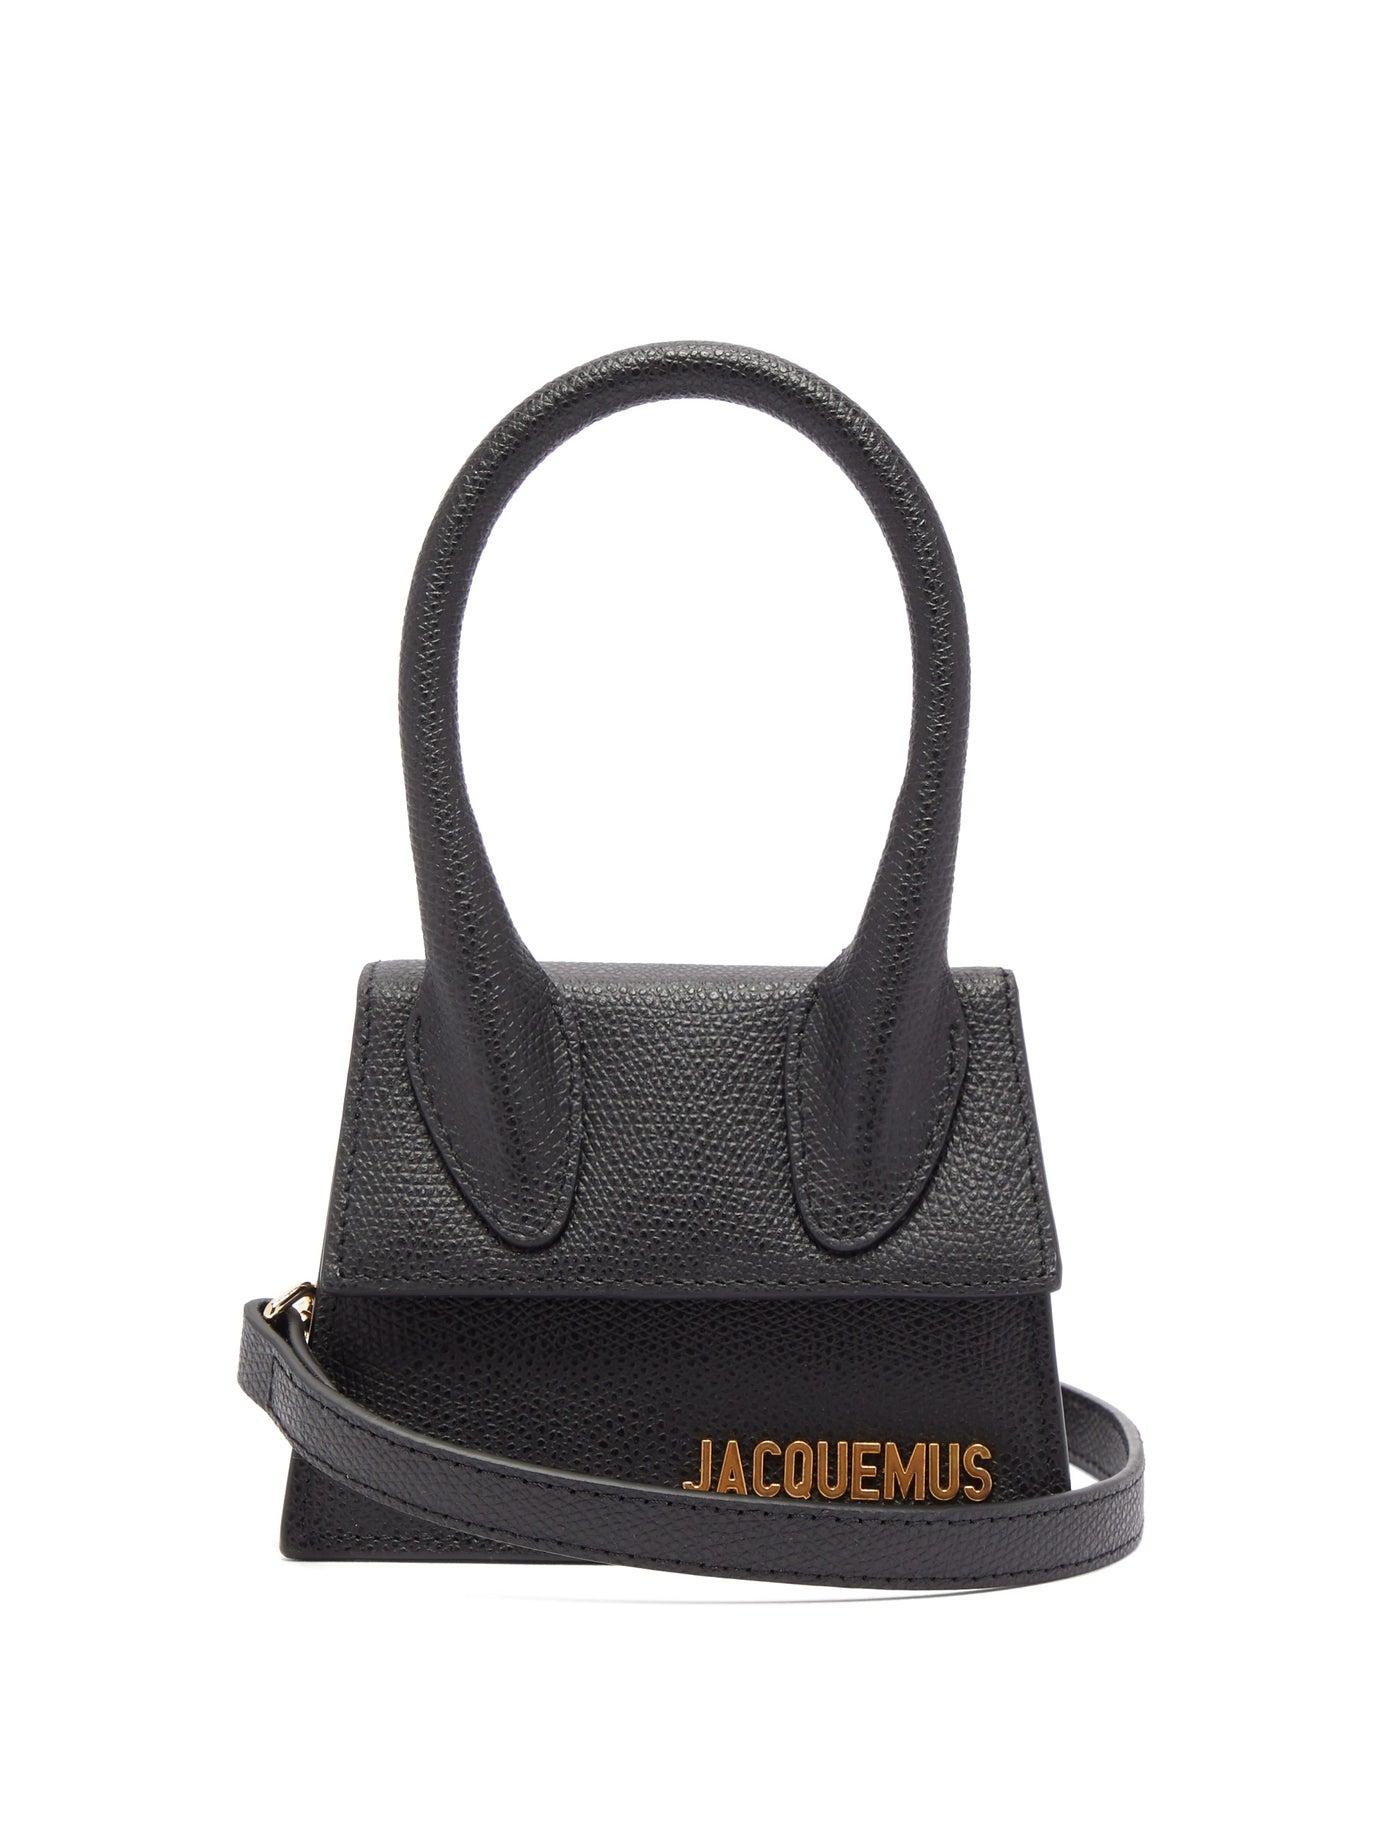 Jacquemus Le Chiquito Grained Leather Cross Body Bag in Black | Lyst